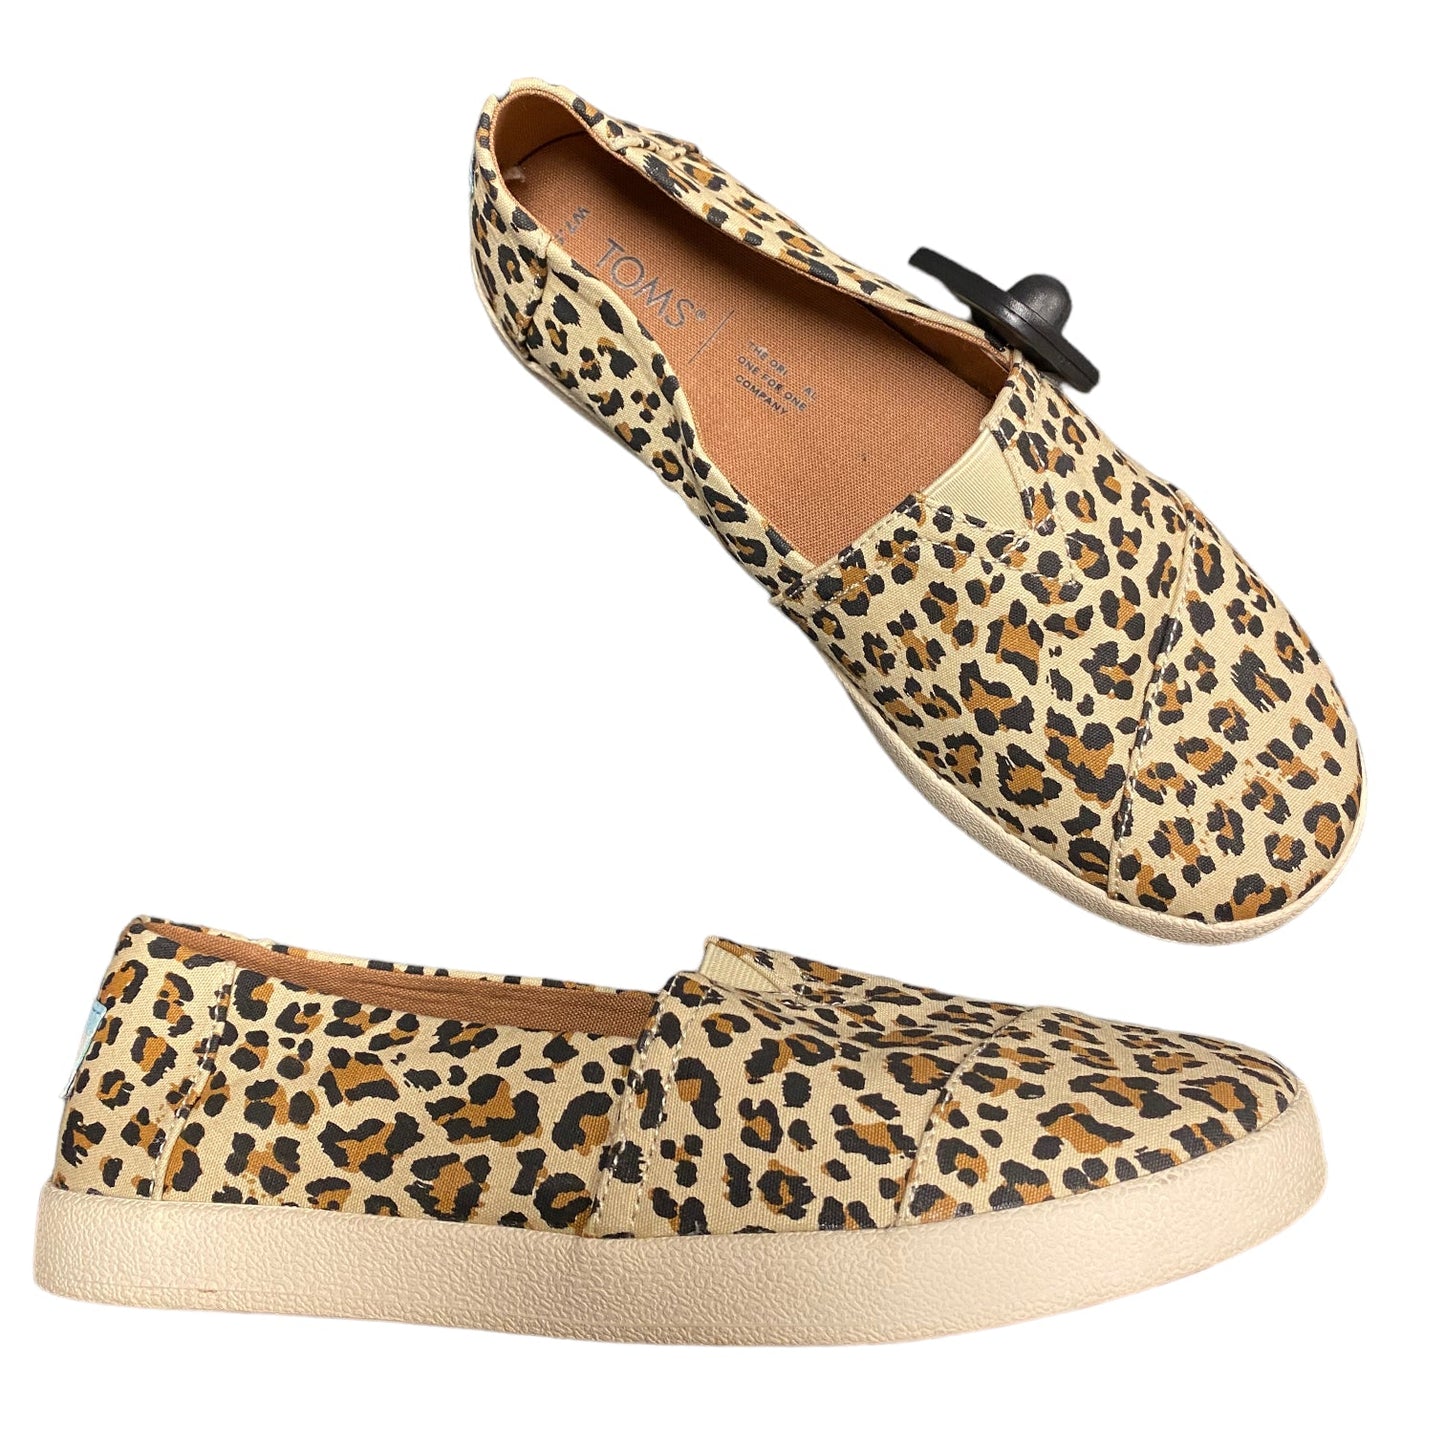 Animal Print Shoes Flats Toms, Size 7.5